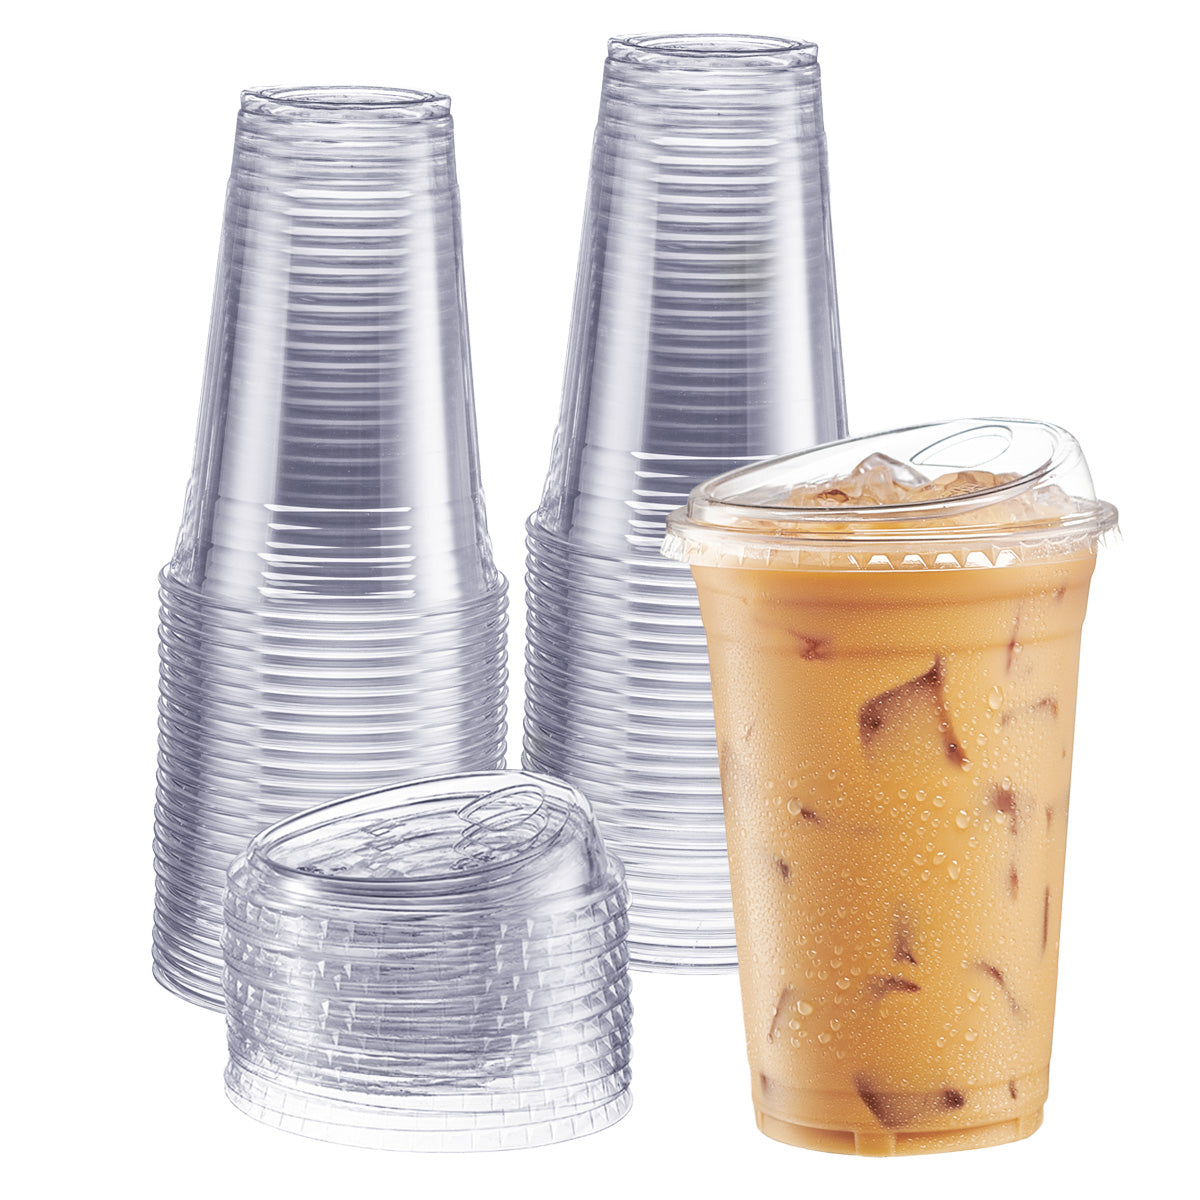 ZORRITA 100 Sets 20 oz Plastic Cups with Lids and Straws, Disposable  Crystal Clear PET Drinking Cups…See more ZORRITA 100 Sets 20 oz Plastic  Cups with